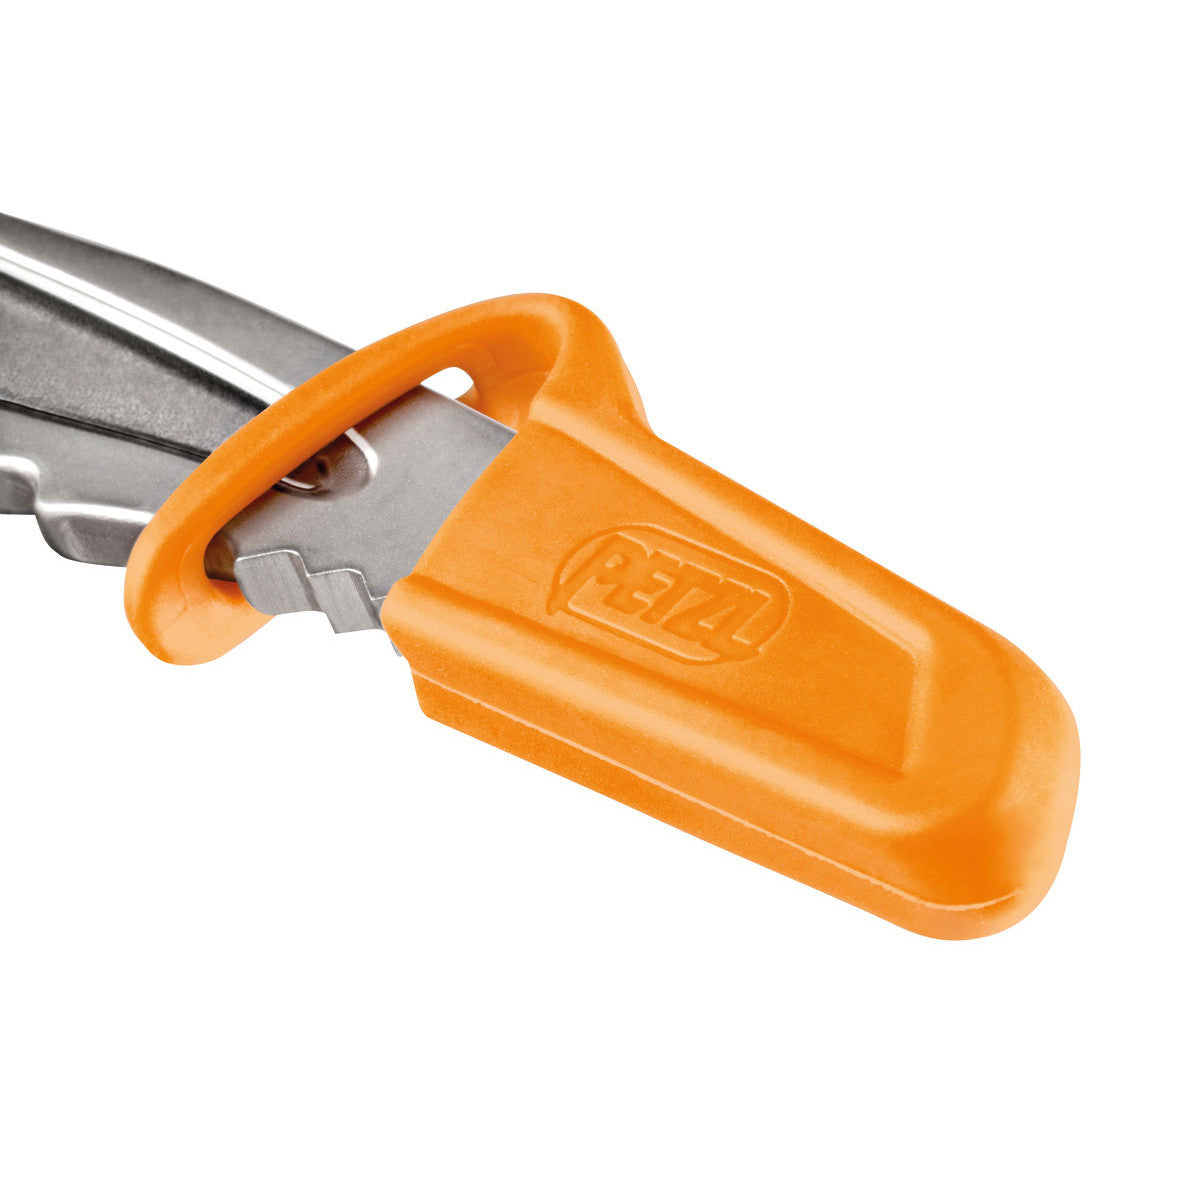 Petzl Pick & Spike Protector, shown side by side in orange colour